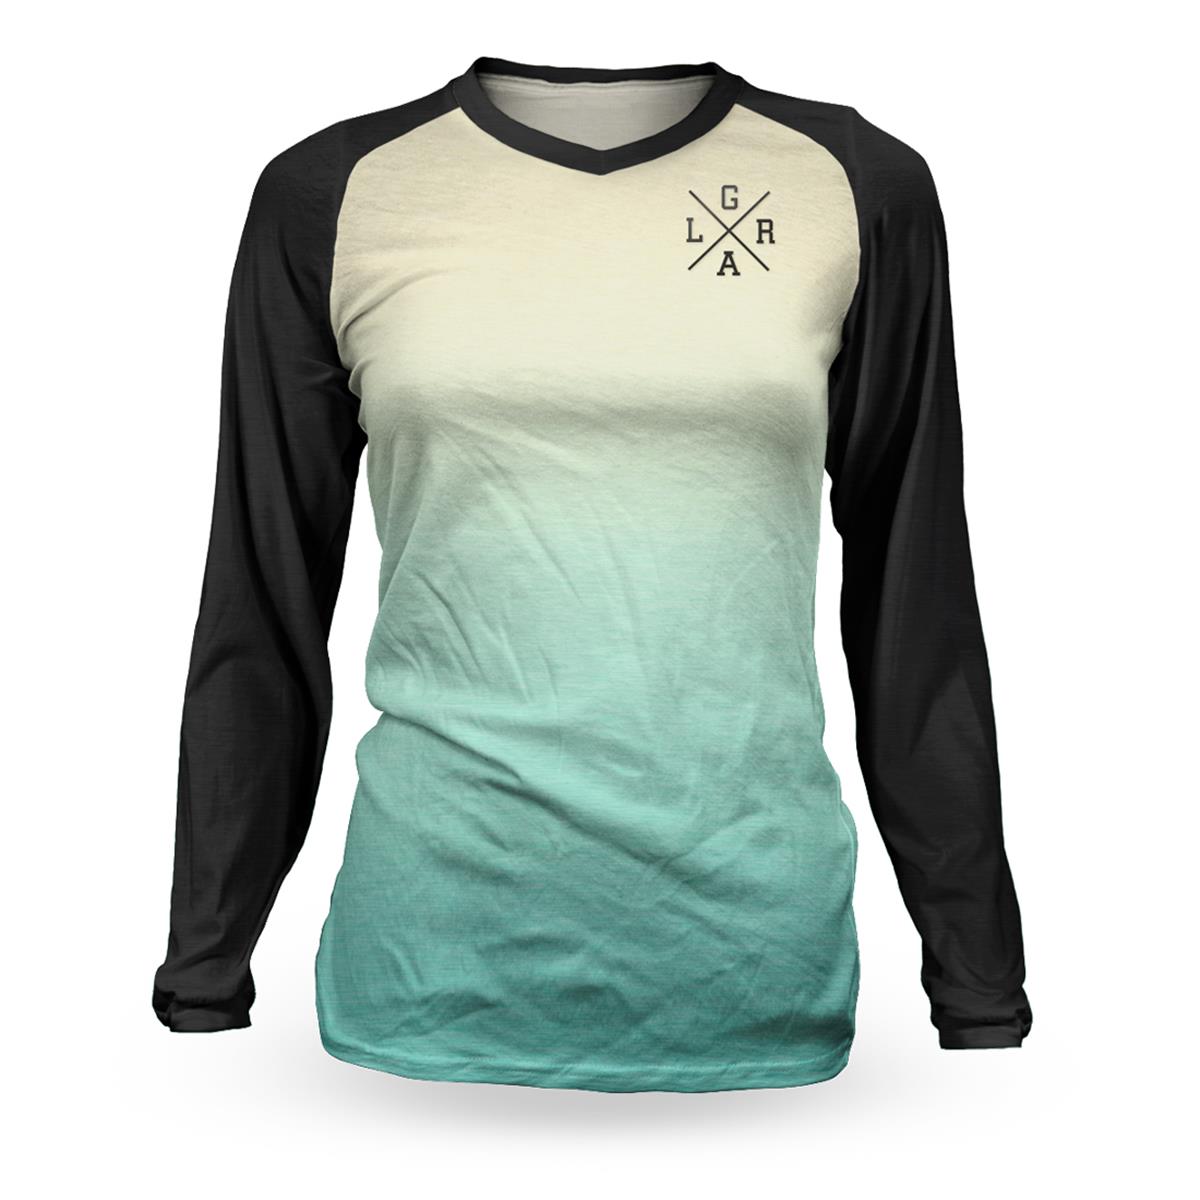 Loose Riders Girls MTB Jersey Cult of Shred Mint - Black/Turquoise/Beige